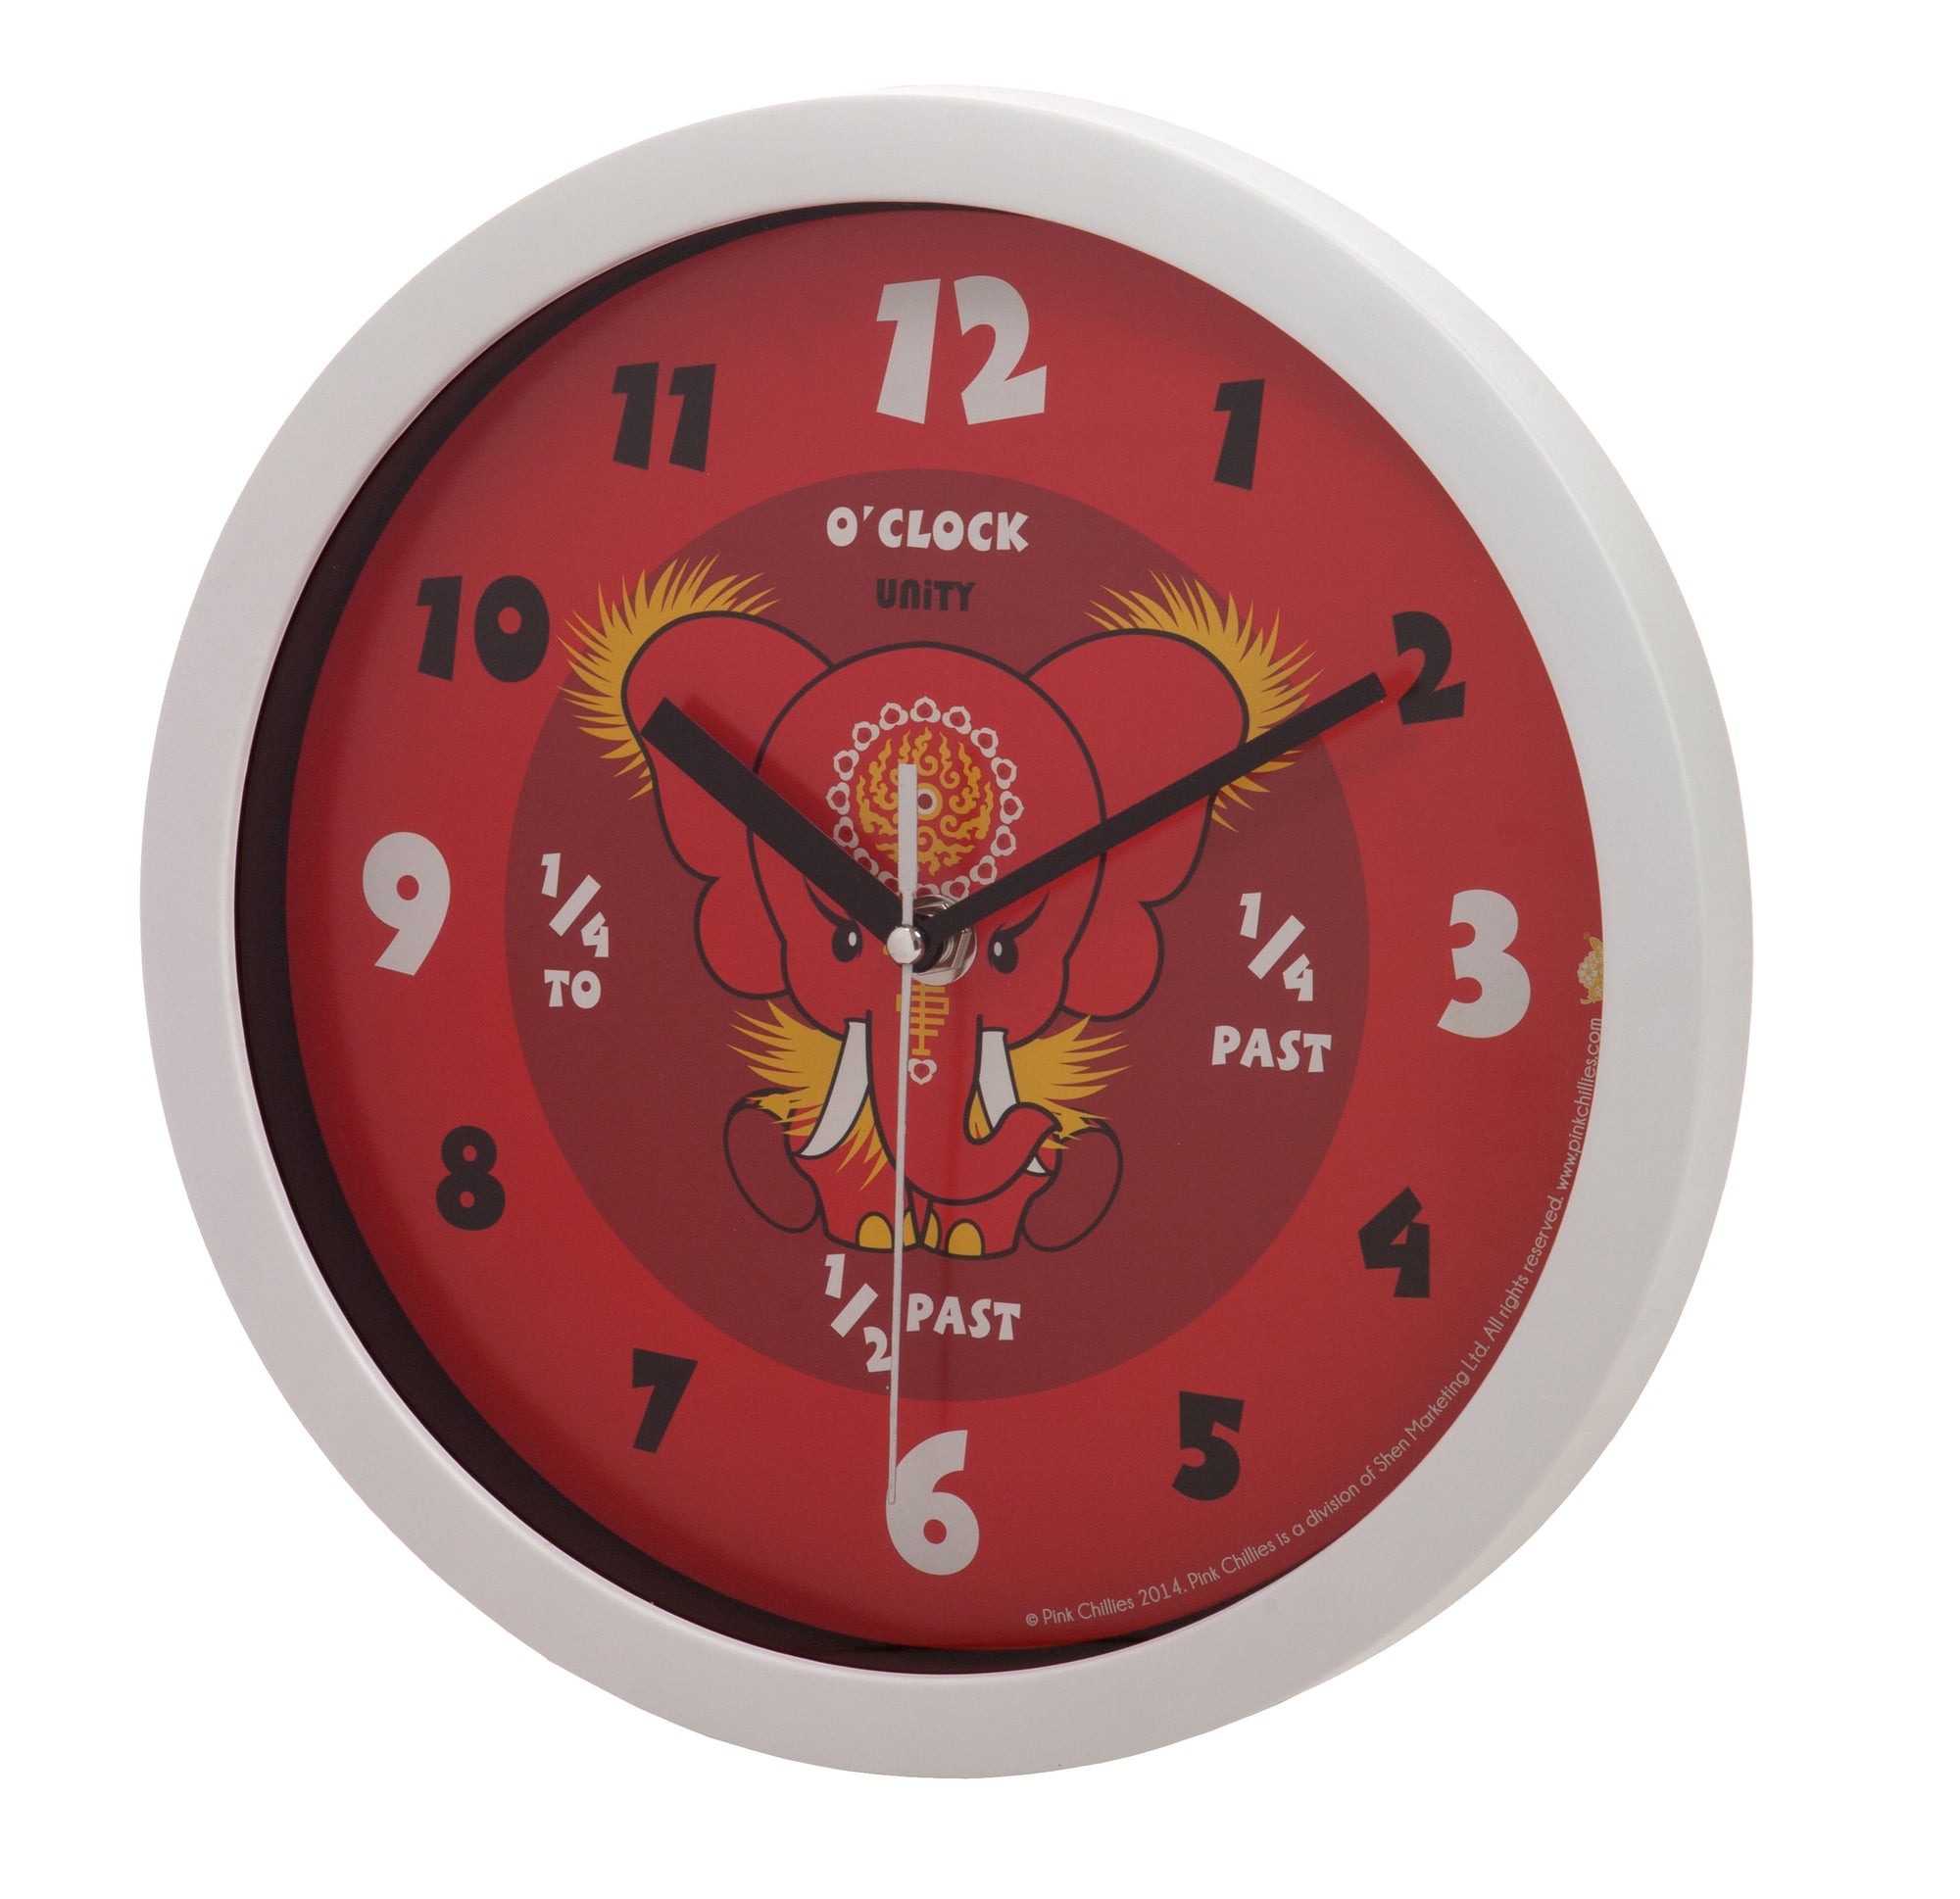 80% Off a Kids Wall Clock - Only £1 + Delivery